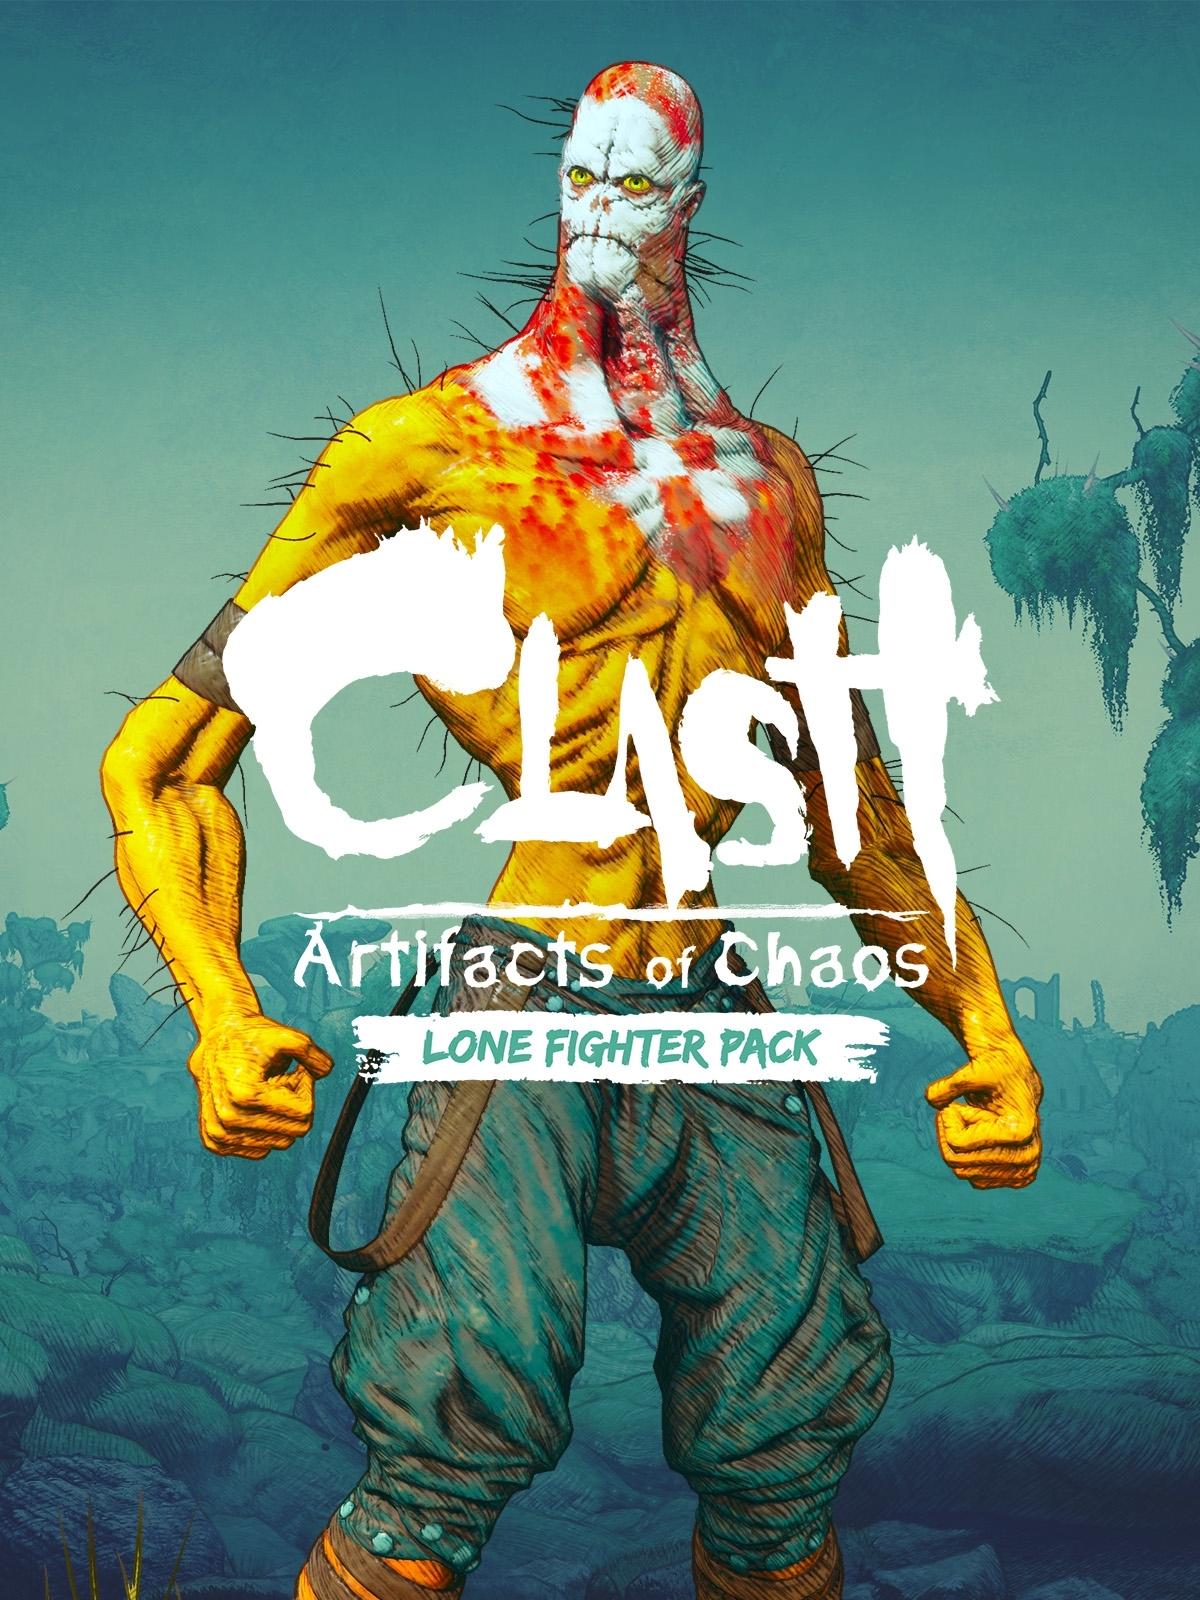 Clash: Artifacts of Chaos - Lone Fighter Pack DLC | WW (a0bce015-0663-4357-a80e-bd49d9200865)